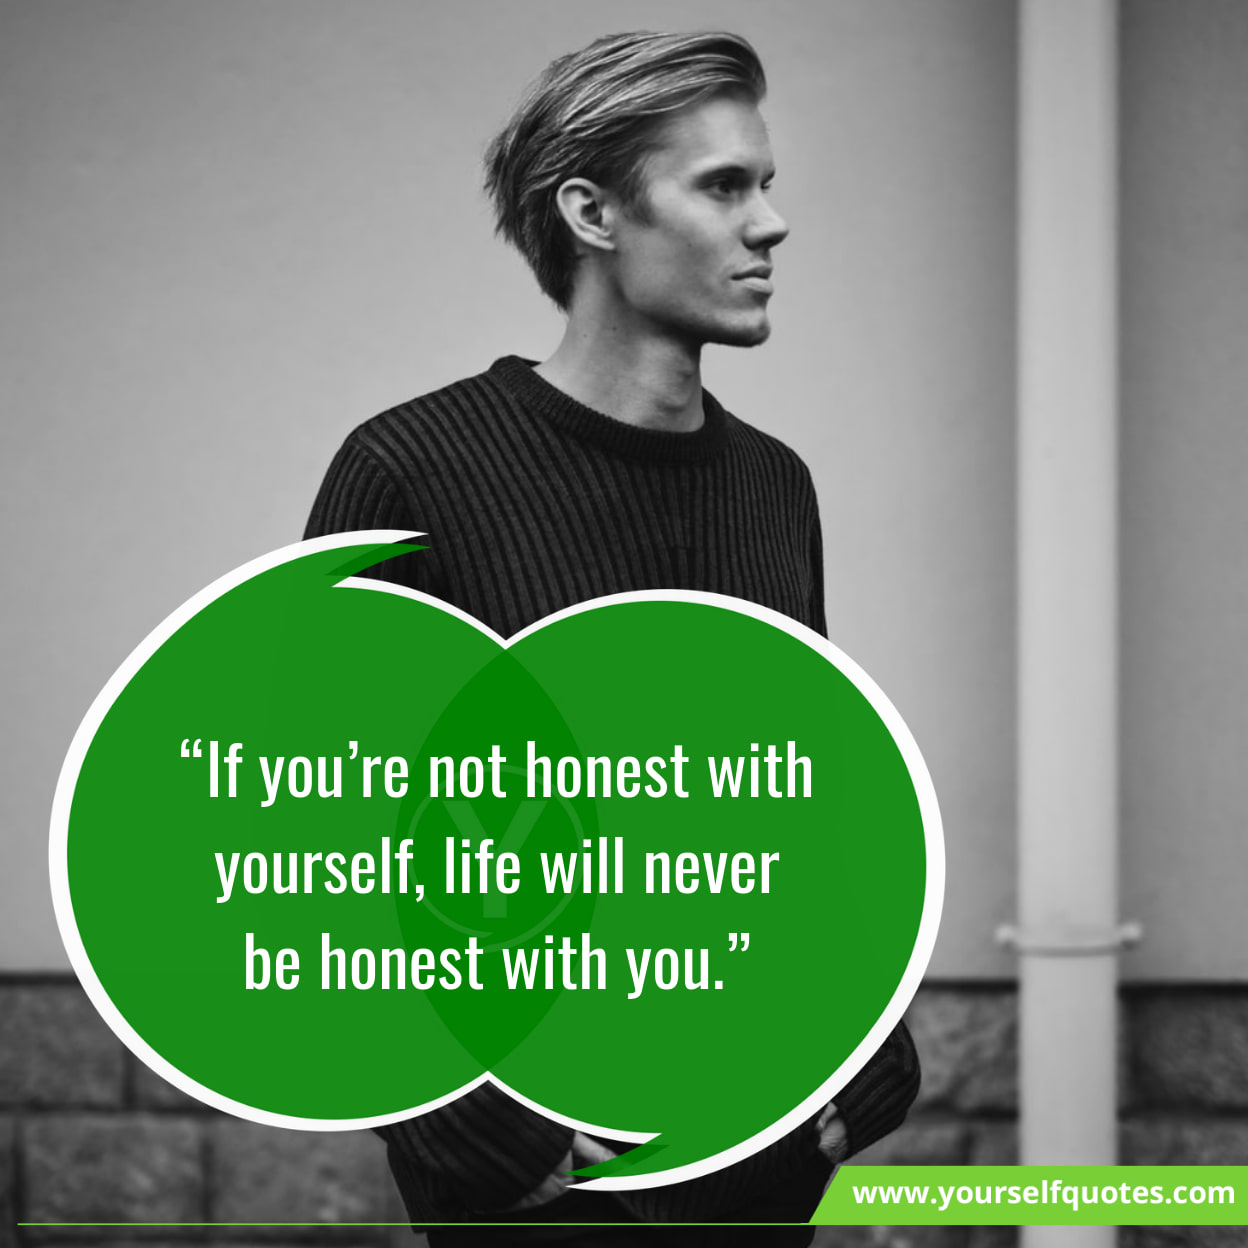 Motivational Quotes On Honesty